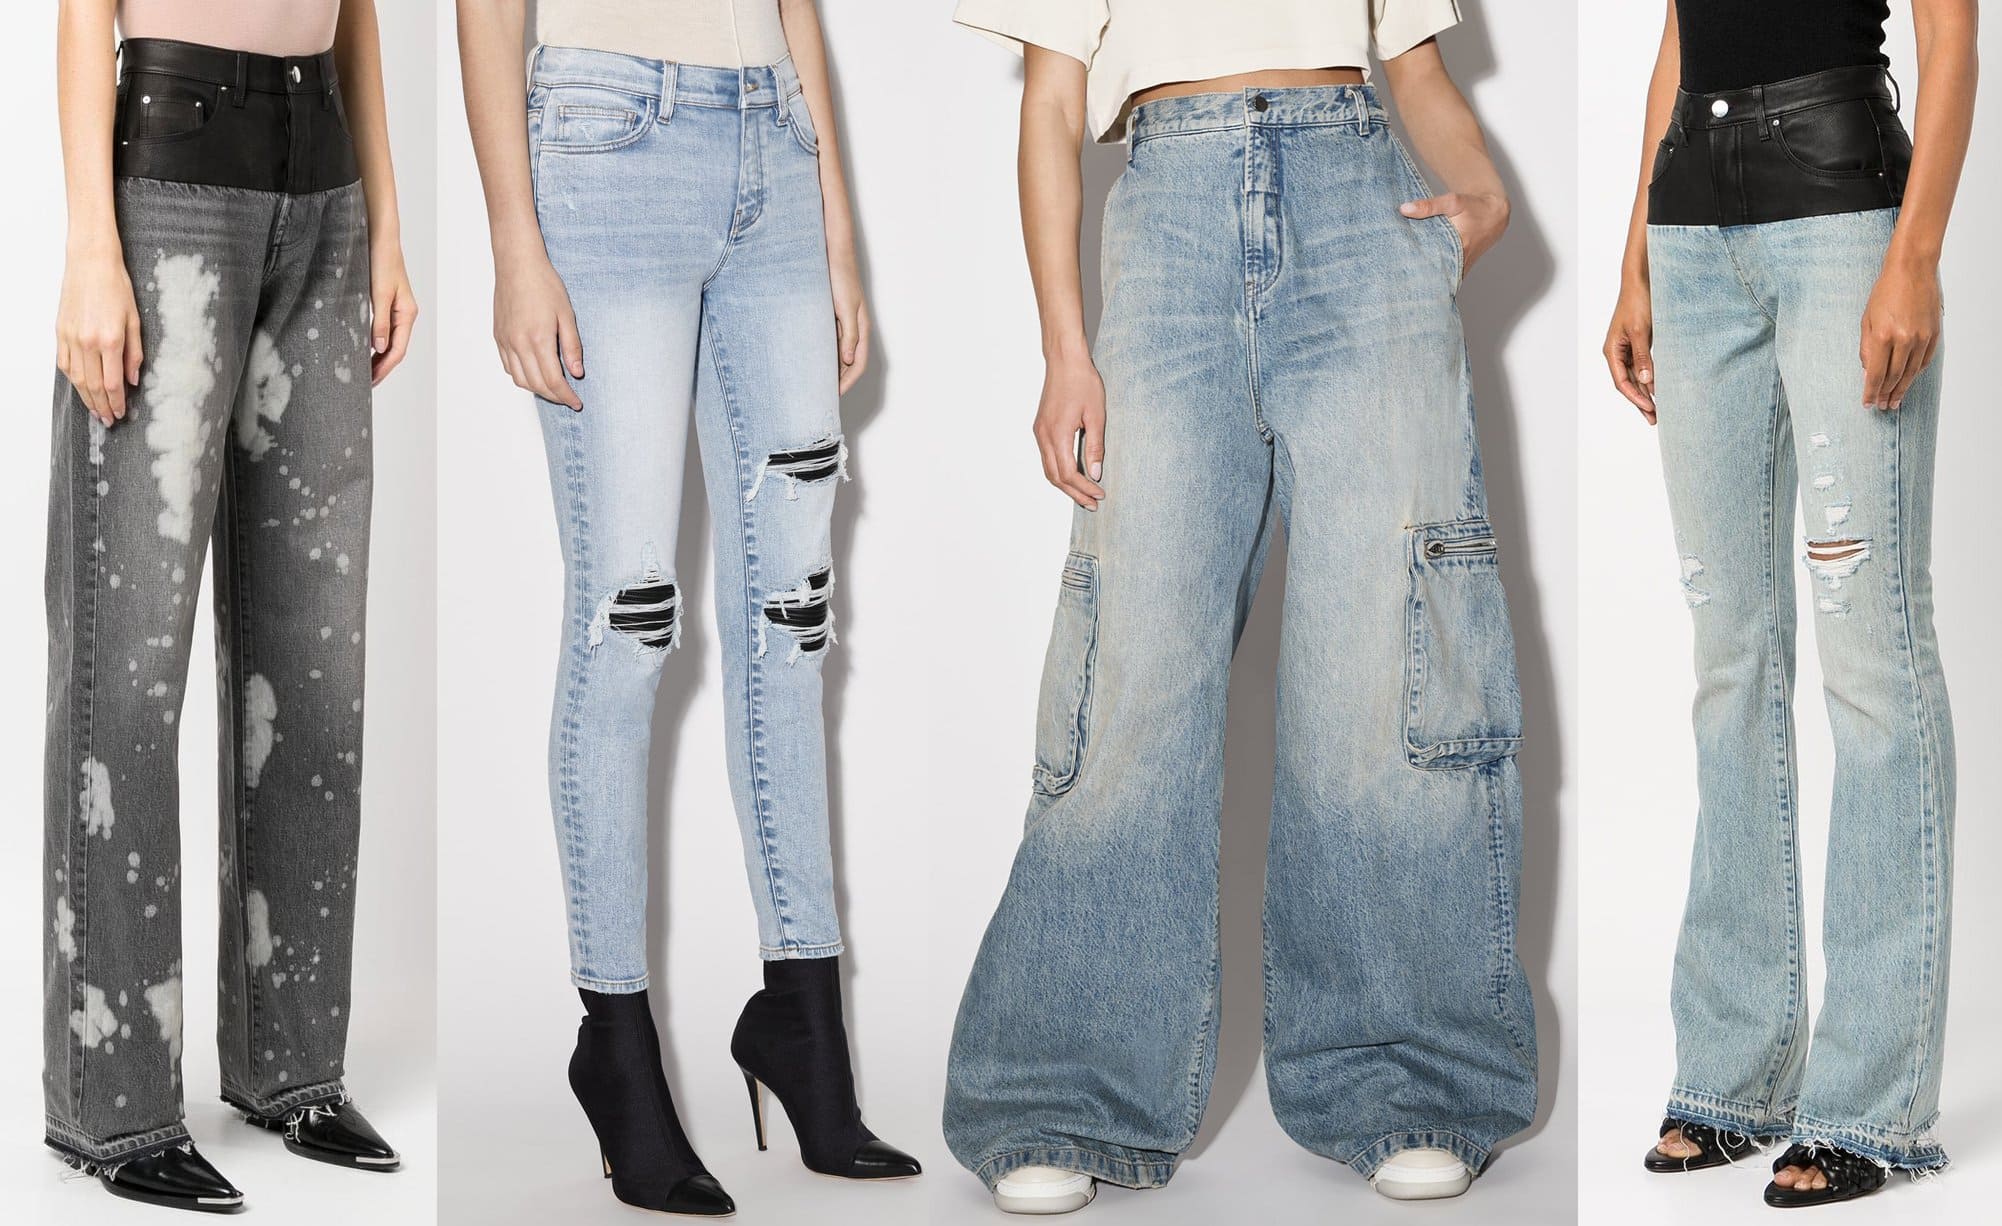 AMIRI Jeans is a streetwear label known for its distressed, deconstructed silhouettes